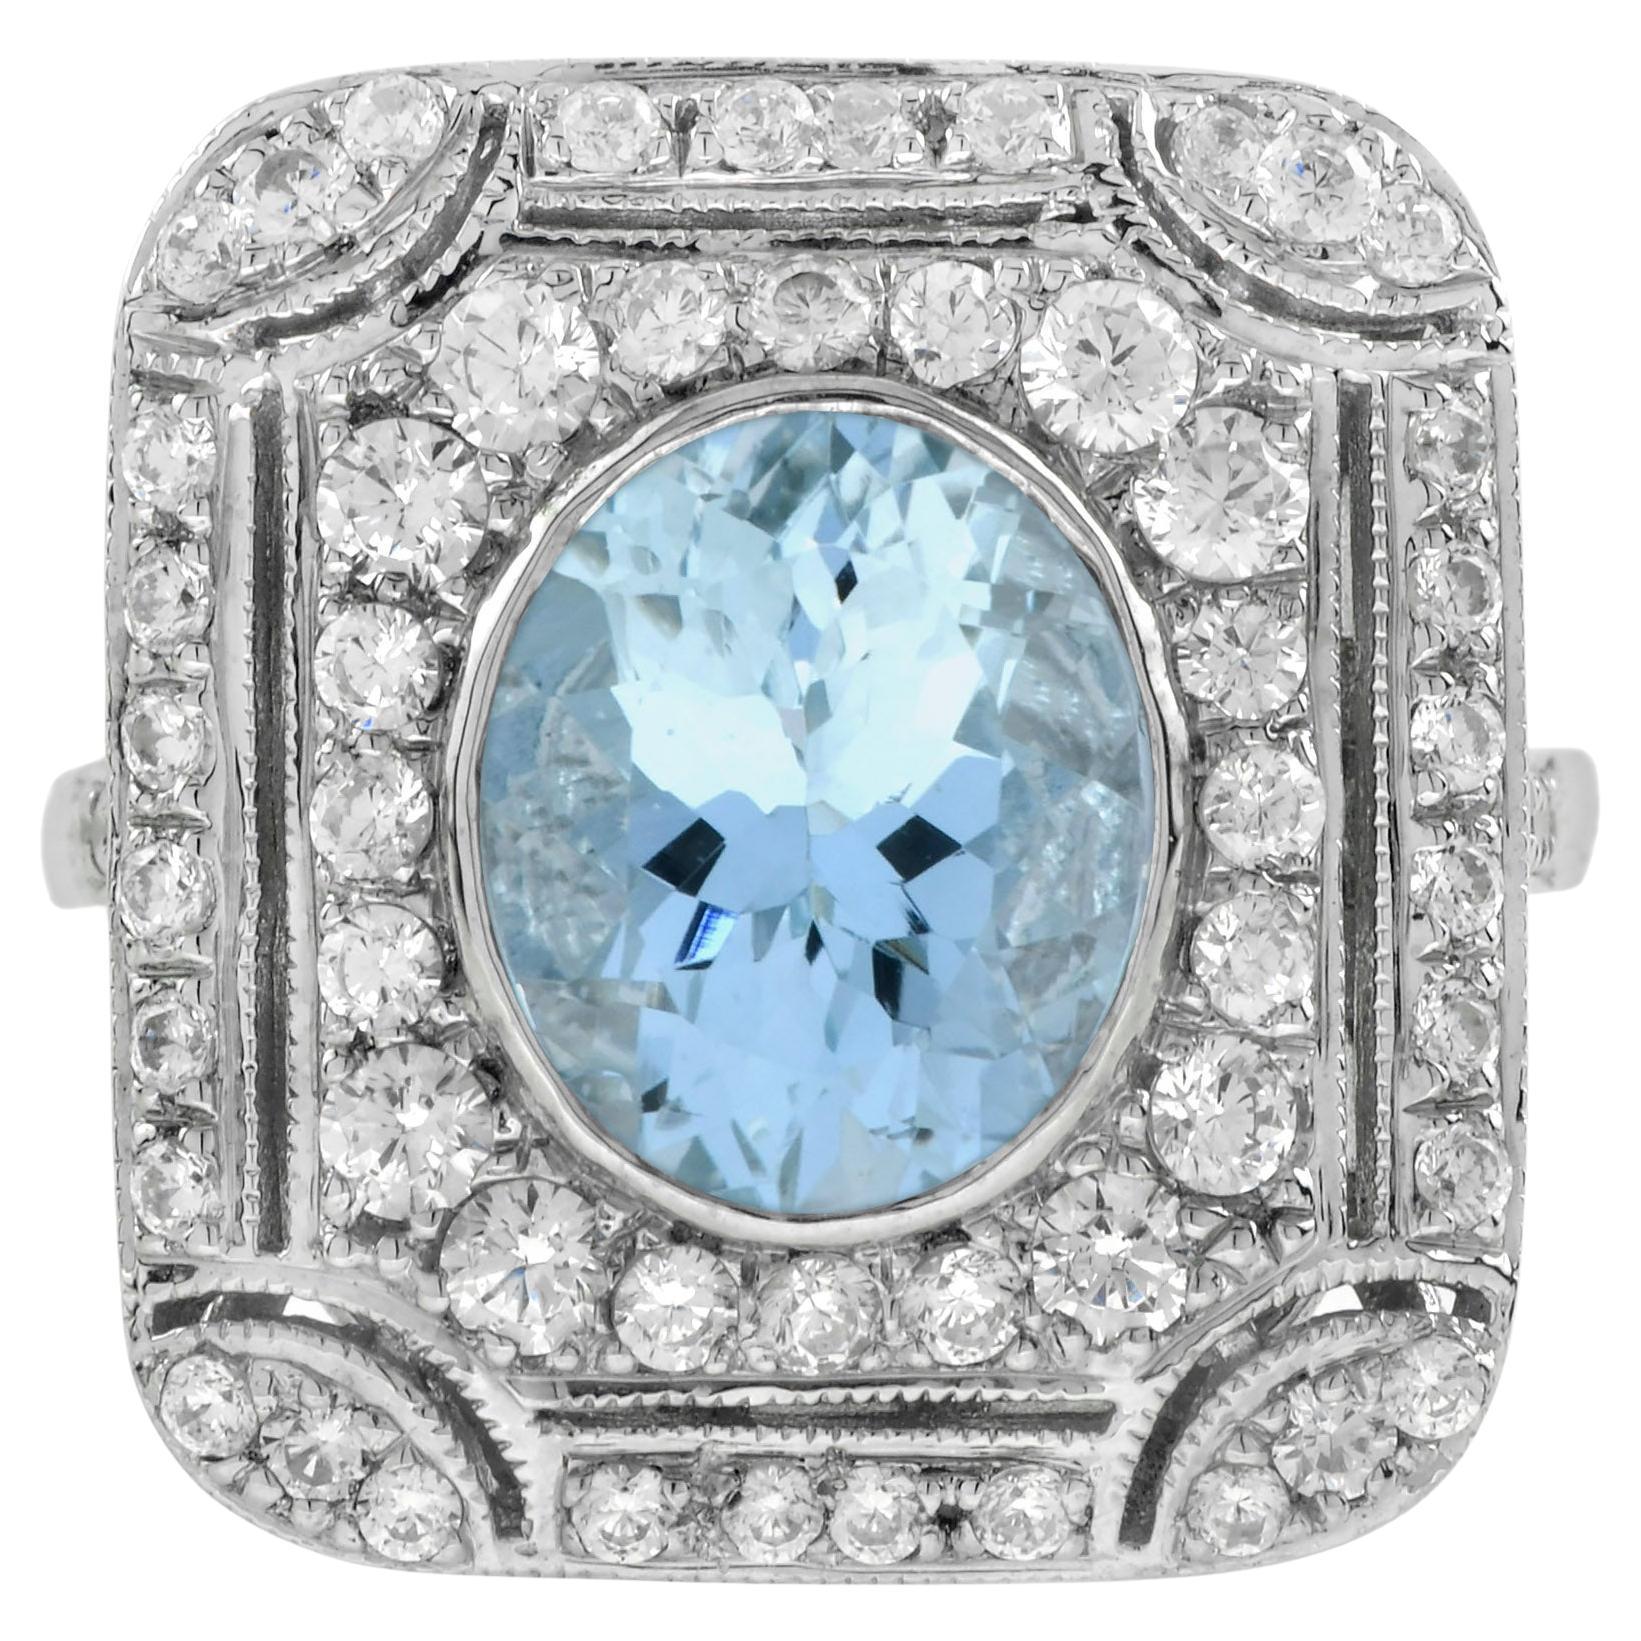 Aquamarine and Diamond Art Deco Style Cocktail Ring in 18K White Gold